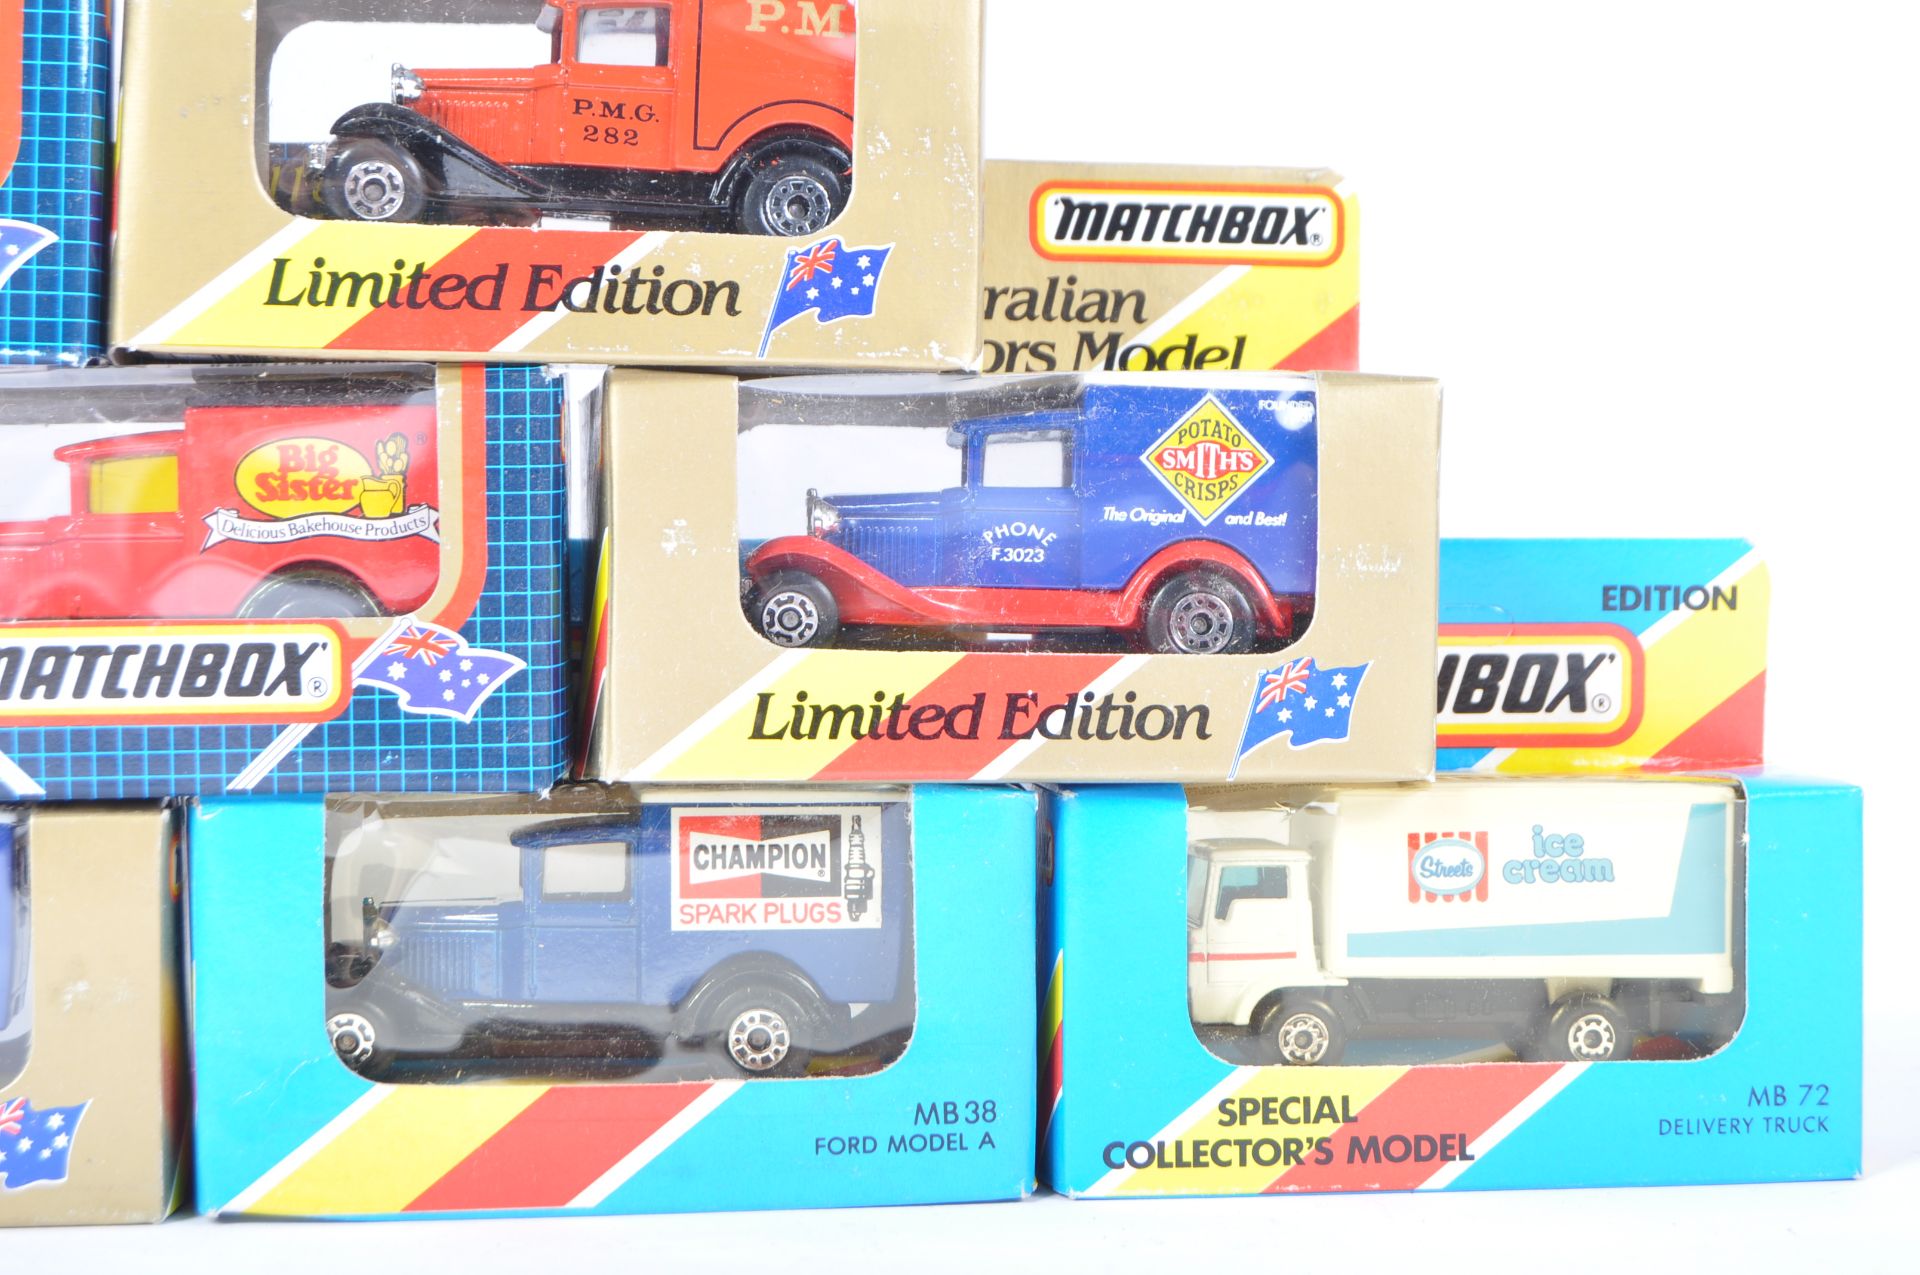 COLLECTION OF X10 VINTAGE MATCHBOX DIECAST MODEL CARS - Image 4 of 5